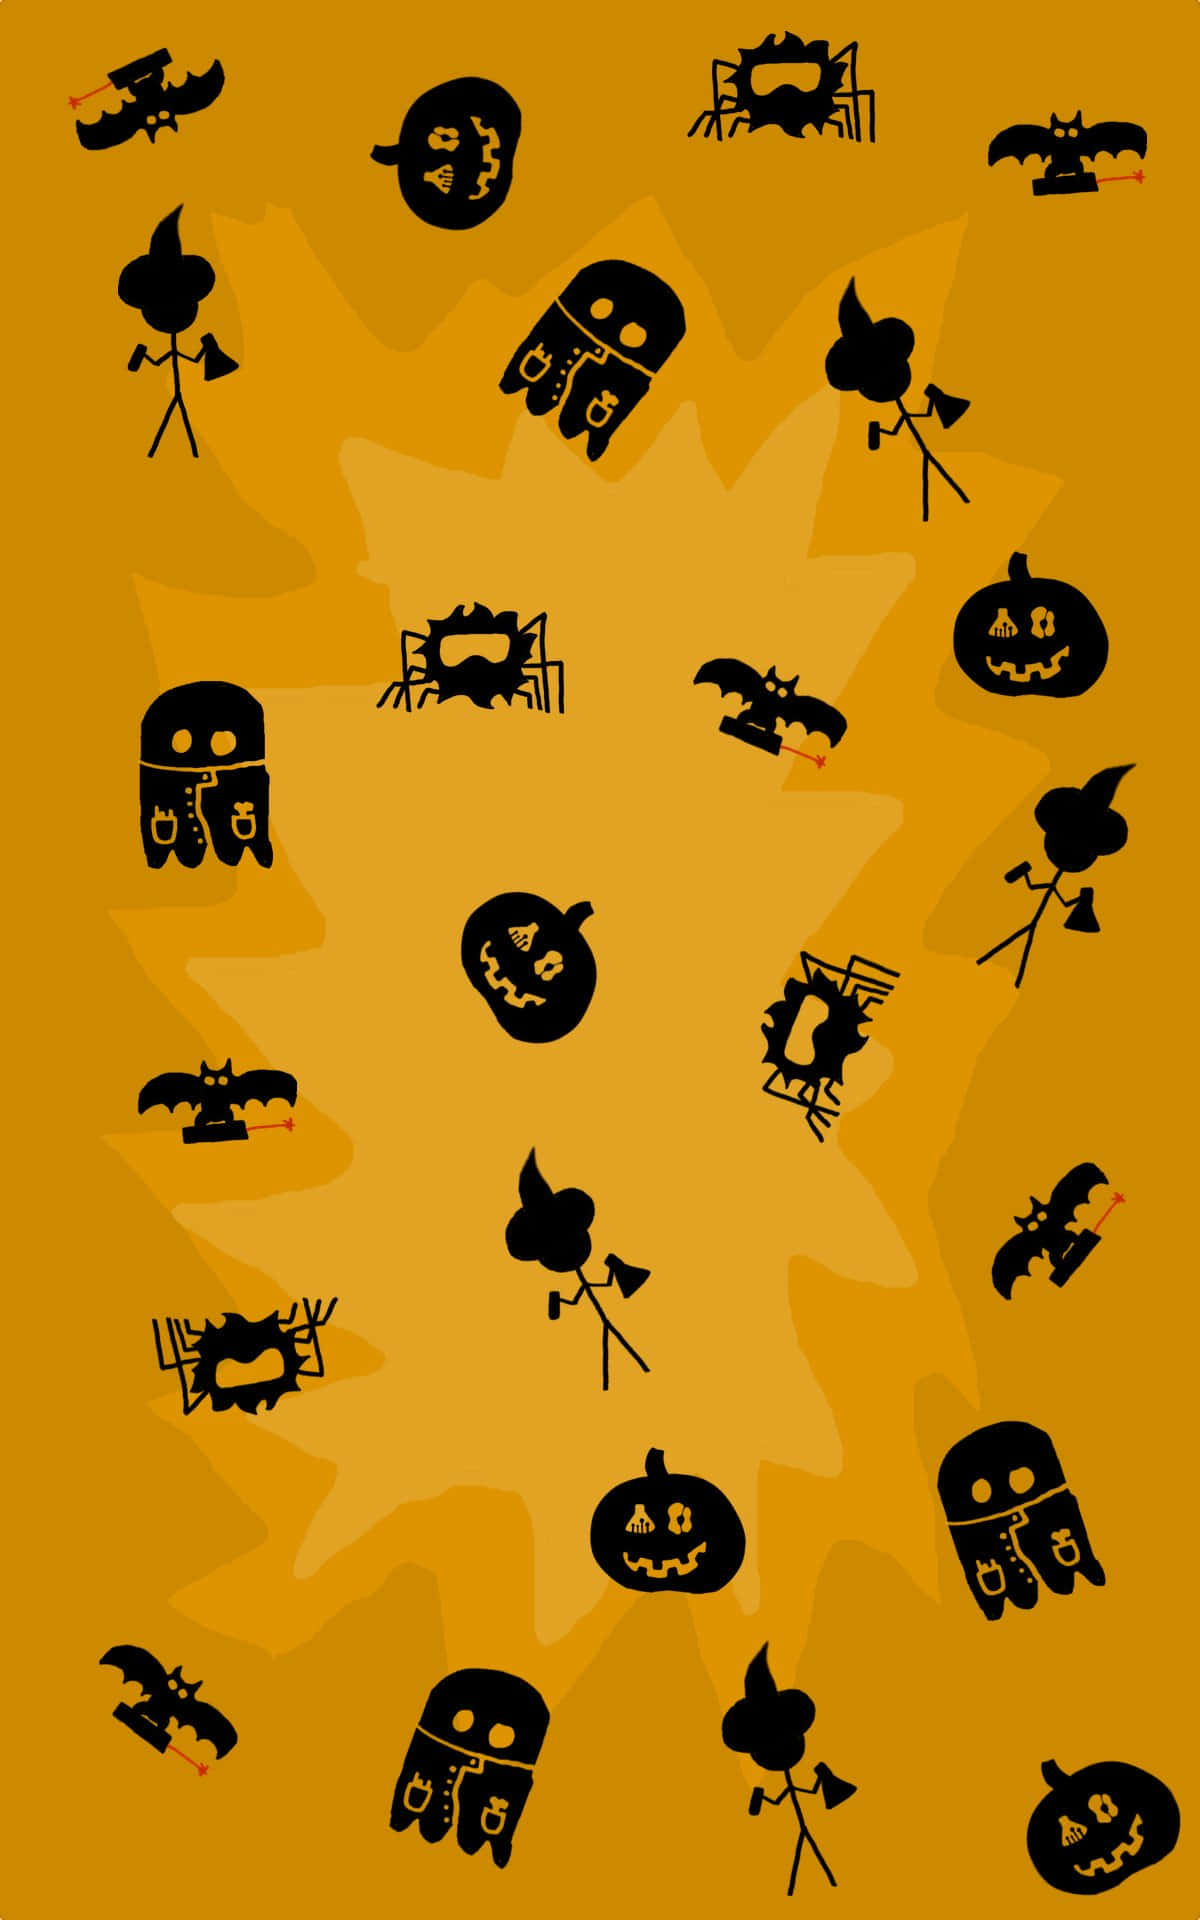 A Halloween Background With Black And White Pumpkins